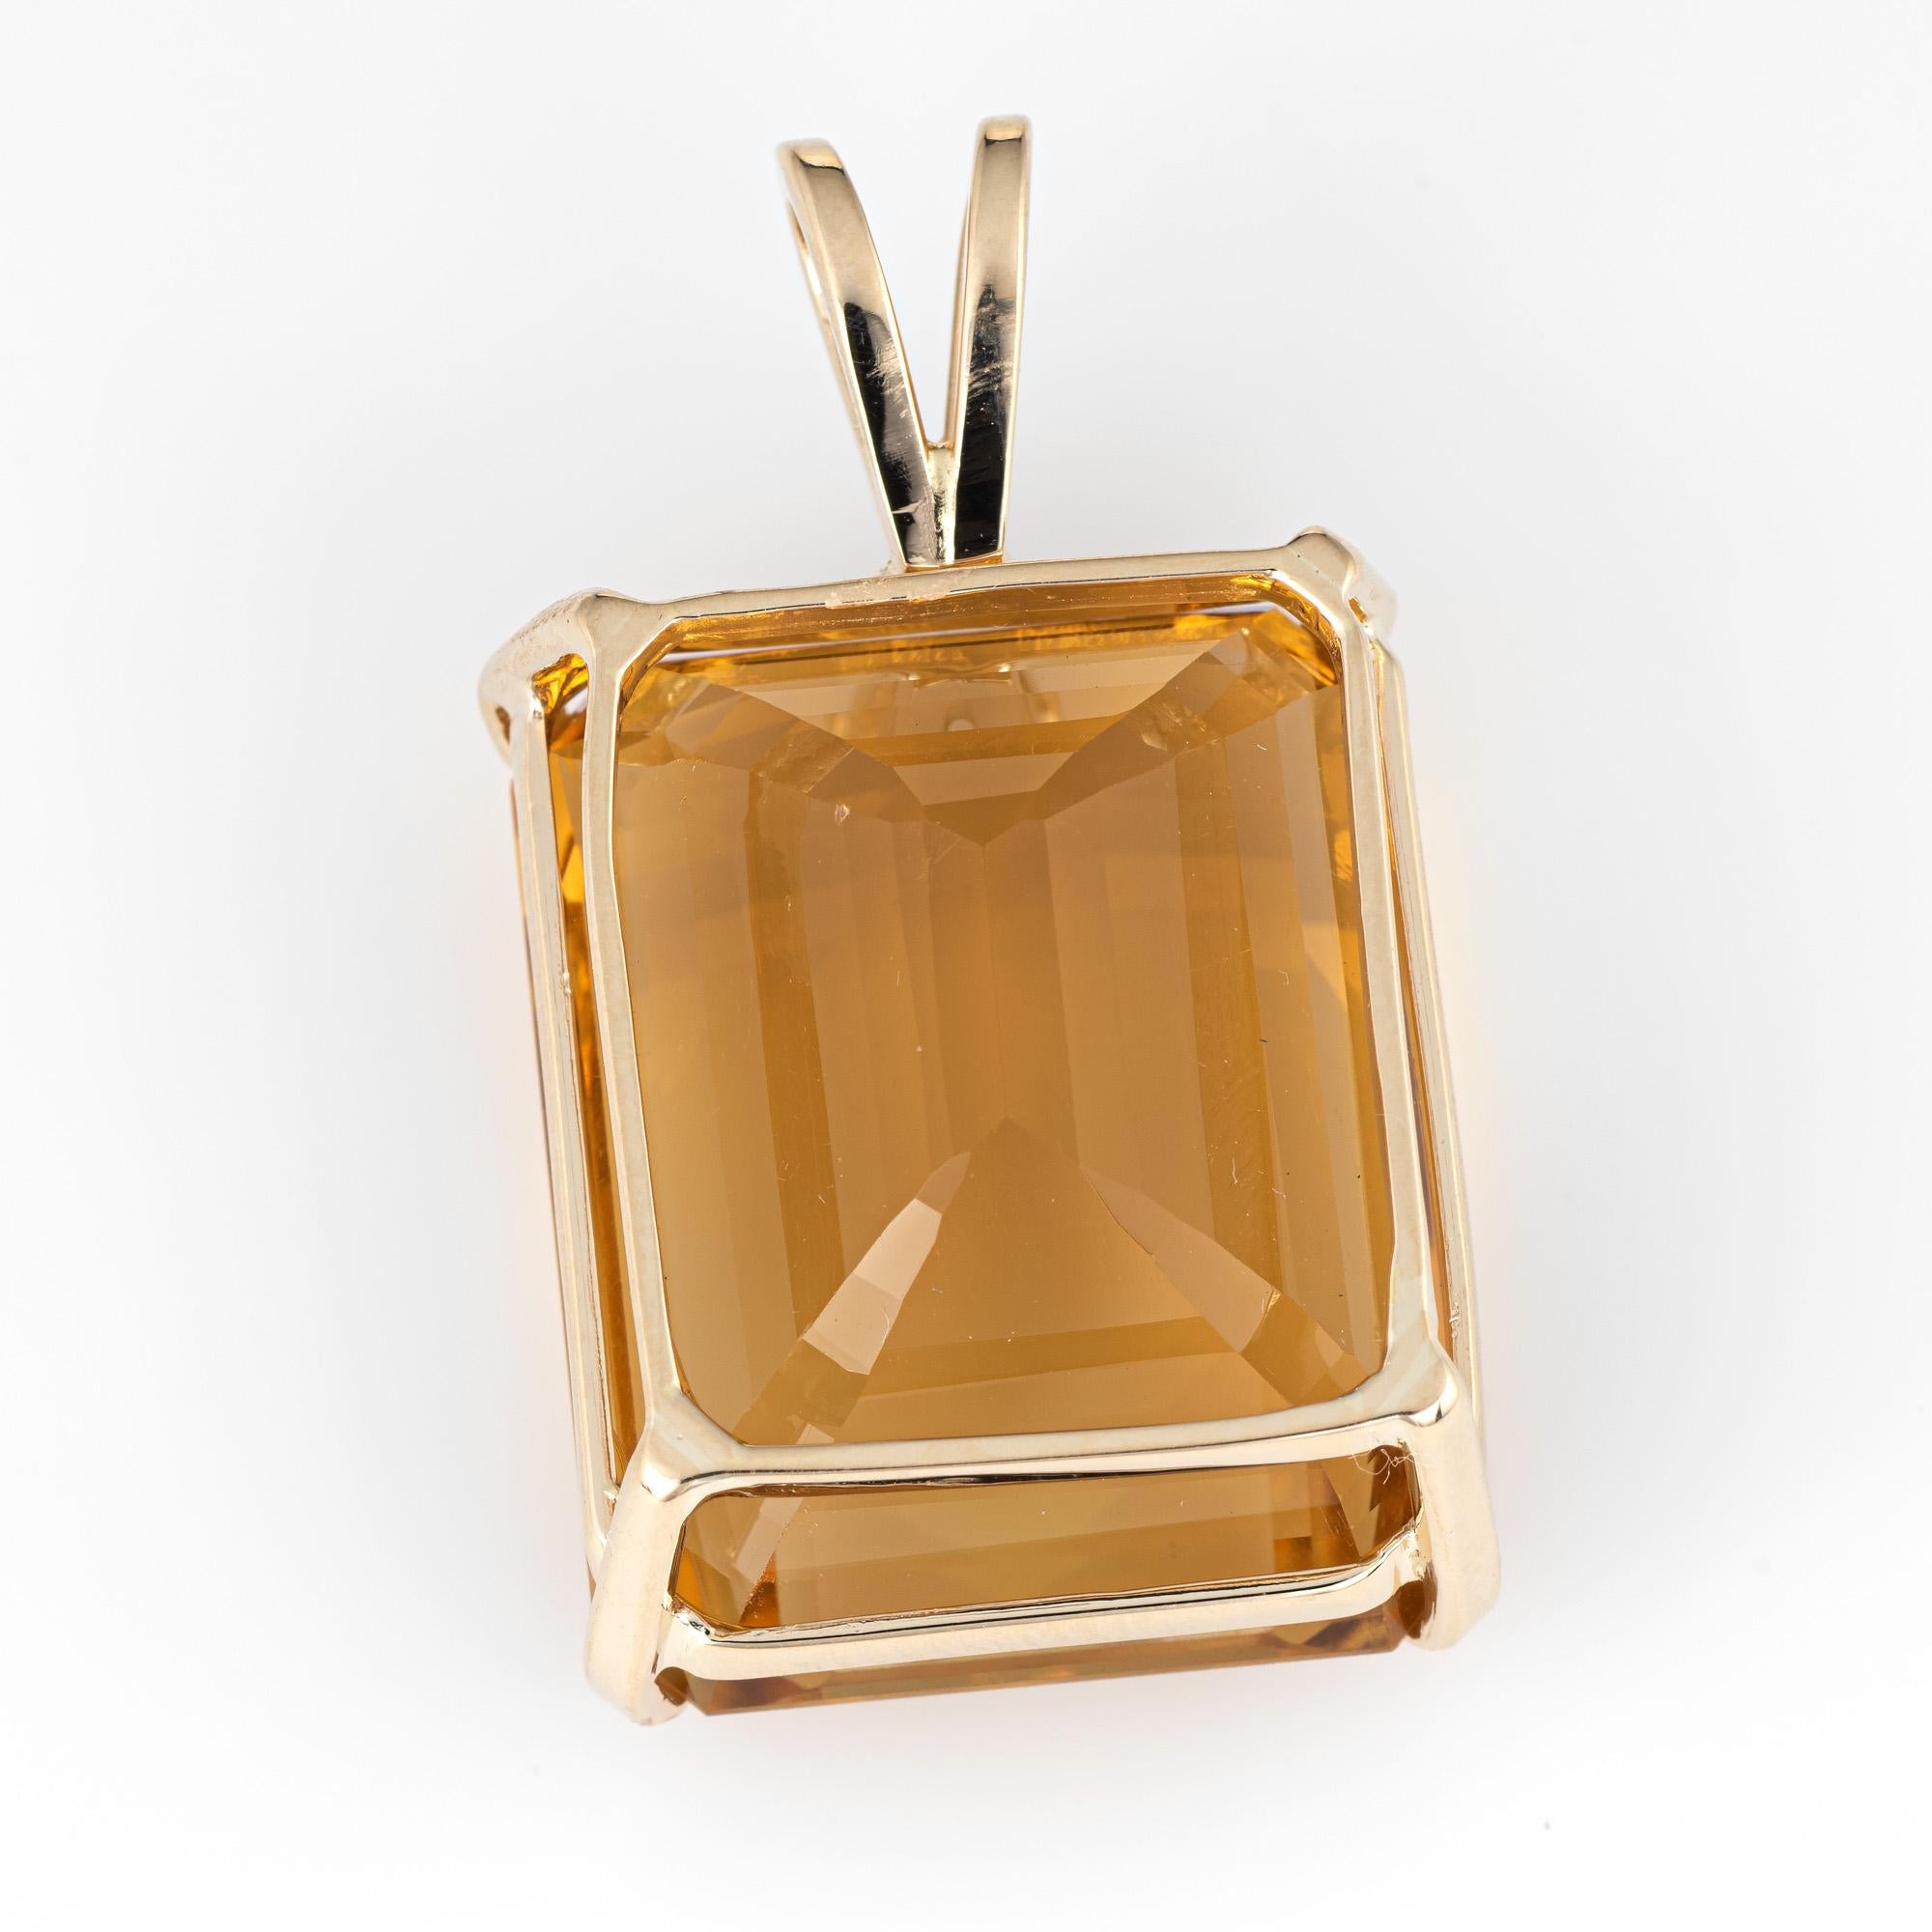 Finely detailed large vintage citrine pendant (circa 1960s to 1970s) crafted in 14k yellow gold.   

The citrine measures 22mm x 18mm (estimated at 37 carats). The citrine is in very good condition (few small chips visible under a 10x loupe).

The